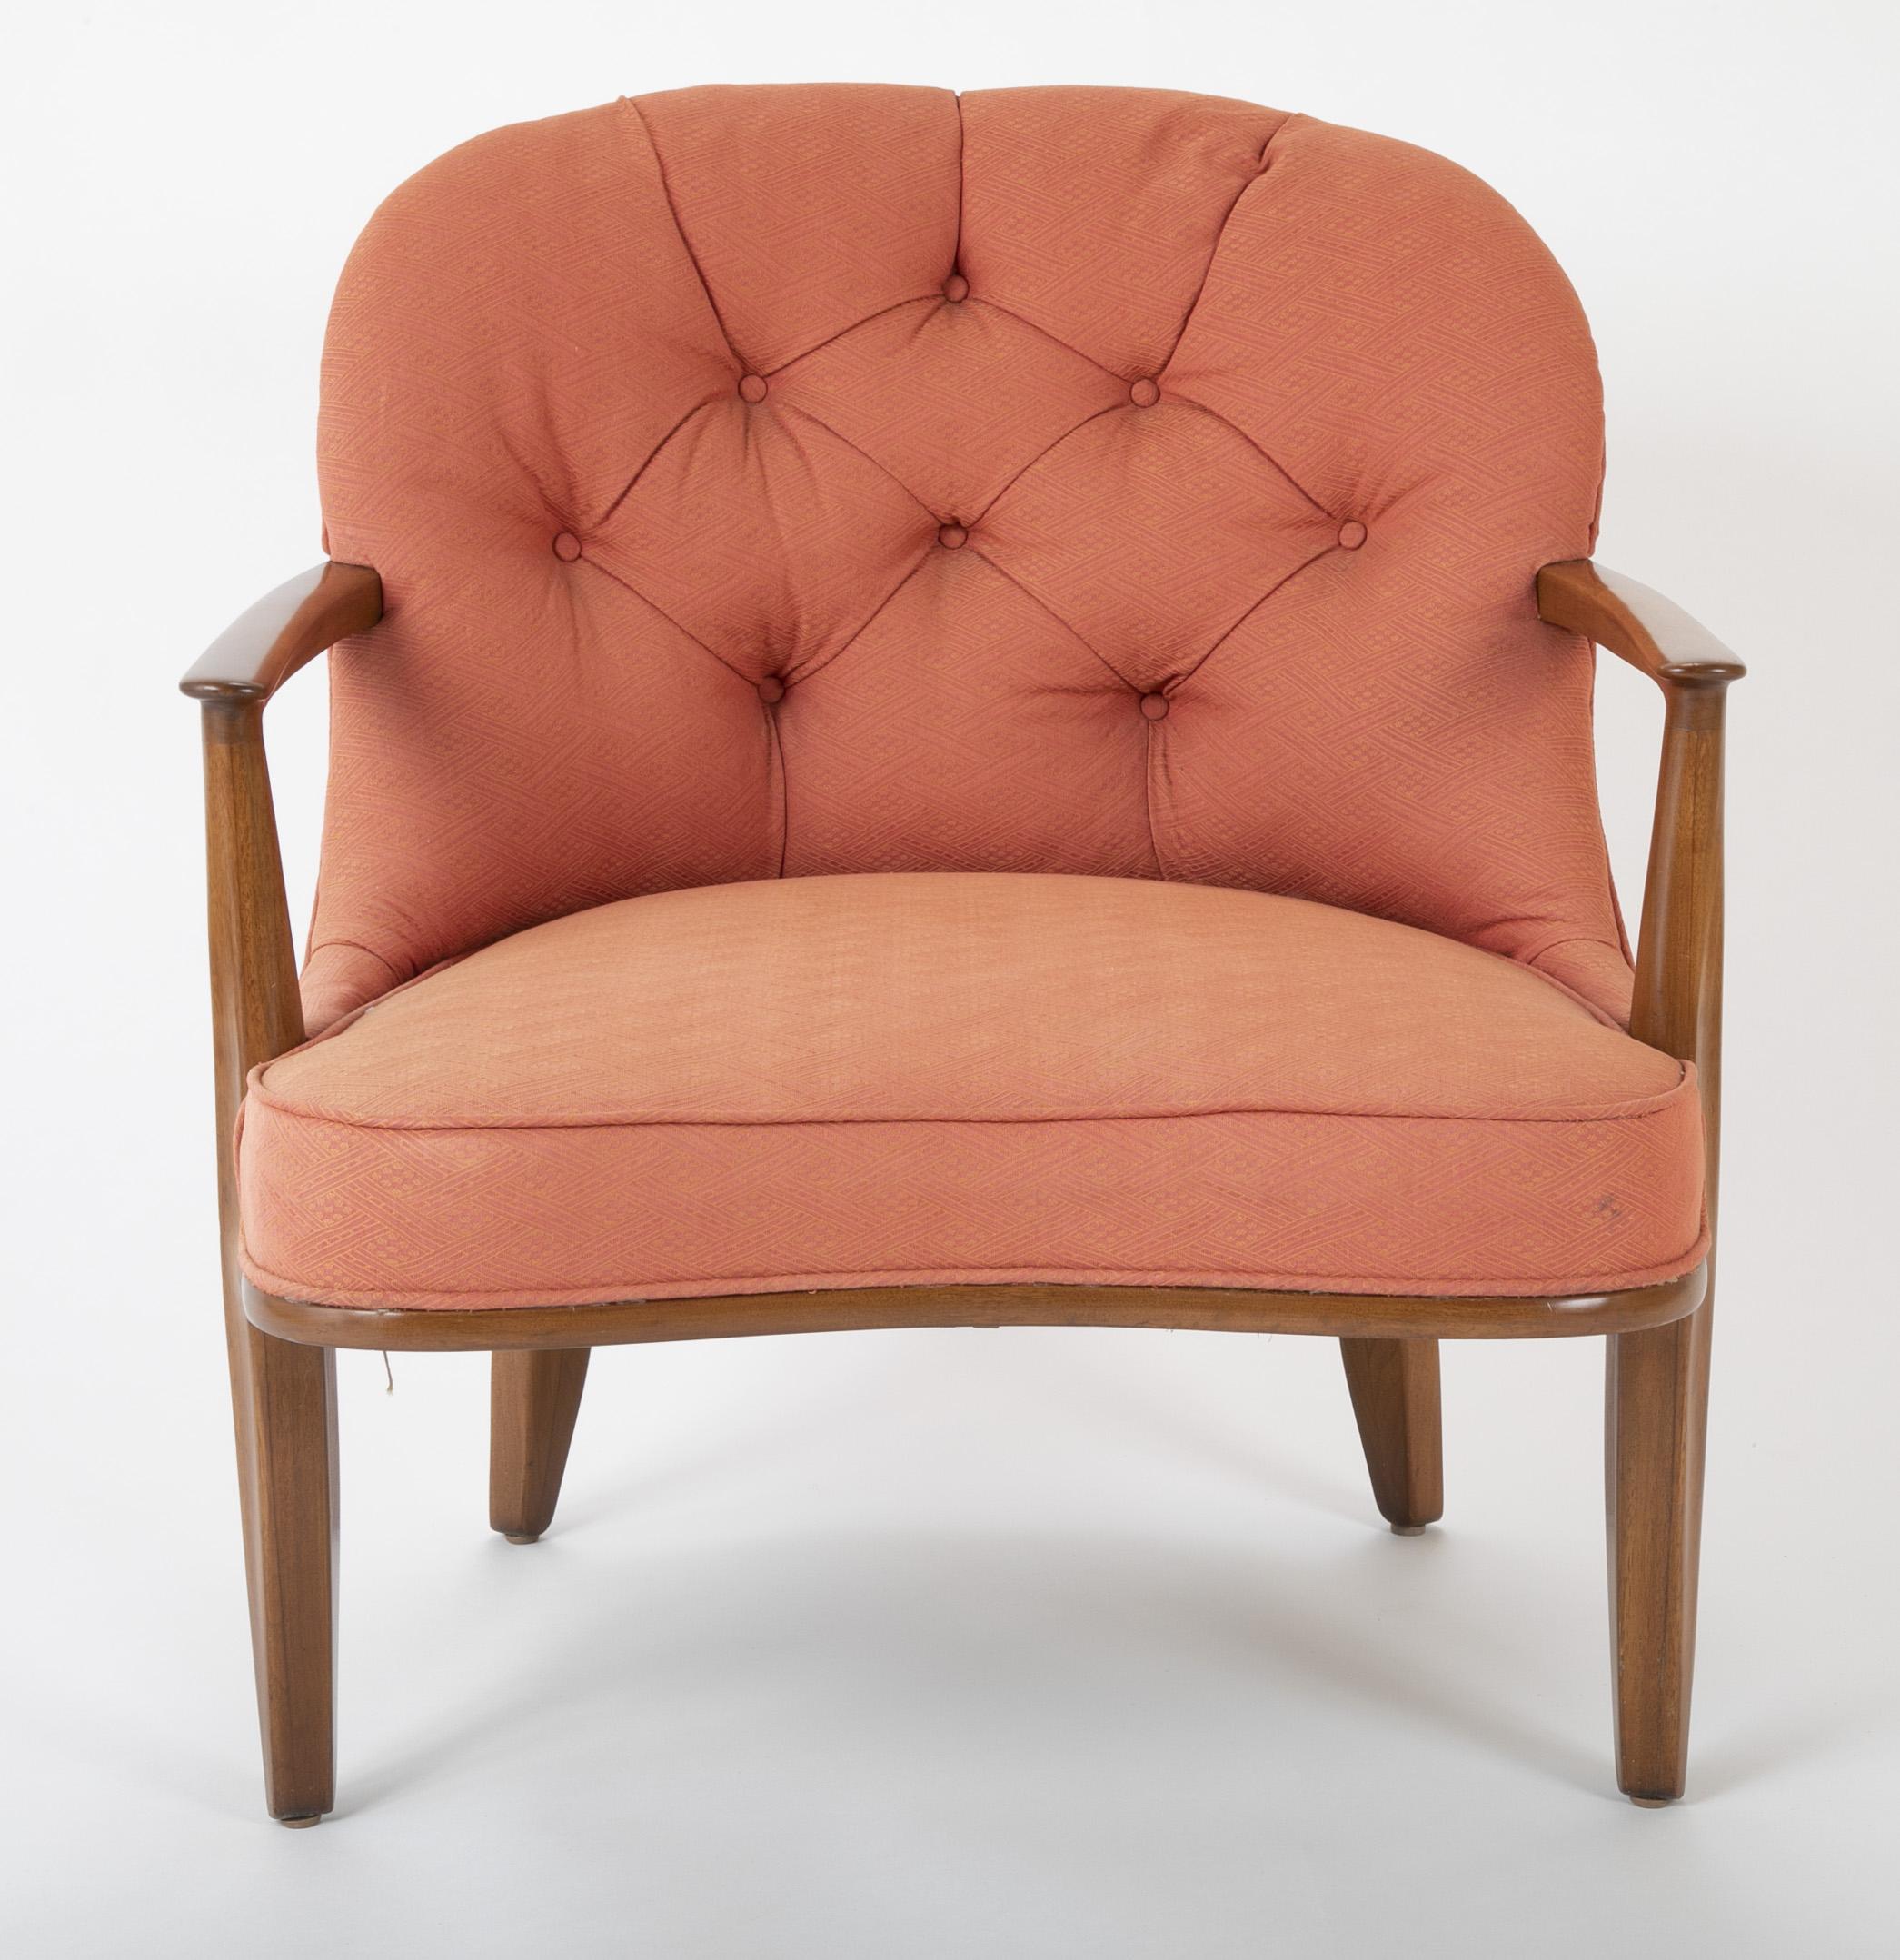 American Pair of Edward Wormley Walnut Armchairs for The Janus Collection of Dunbar